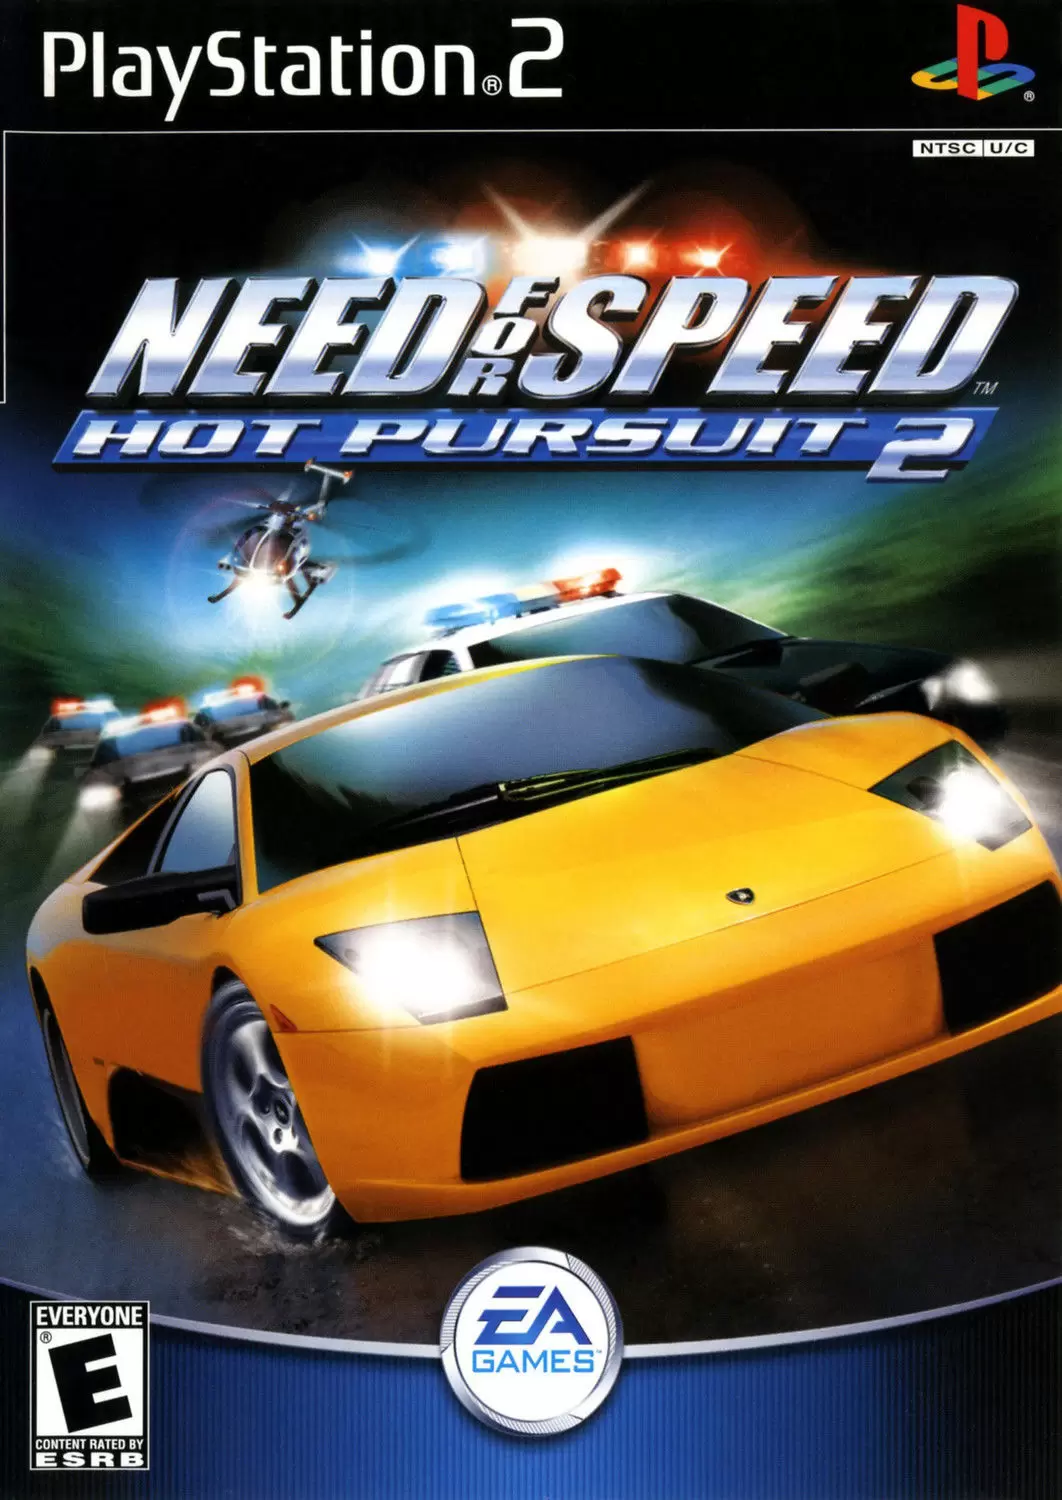 PS2 Games - Need for Speed: Hot Pursuit 2